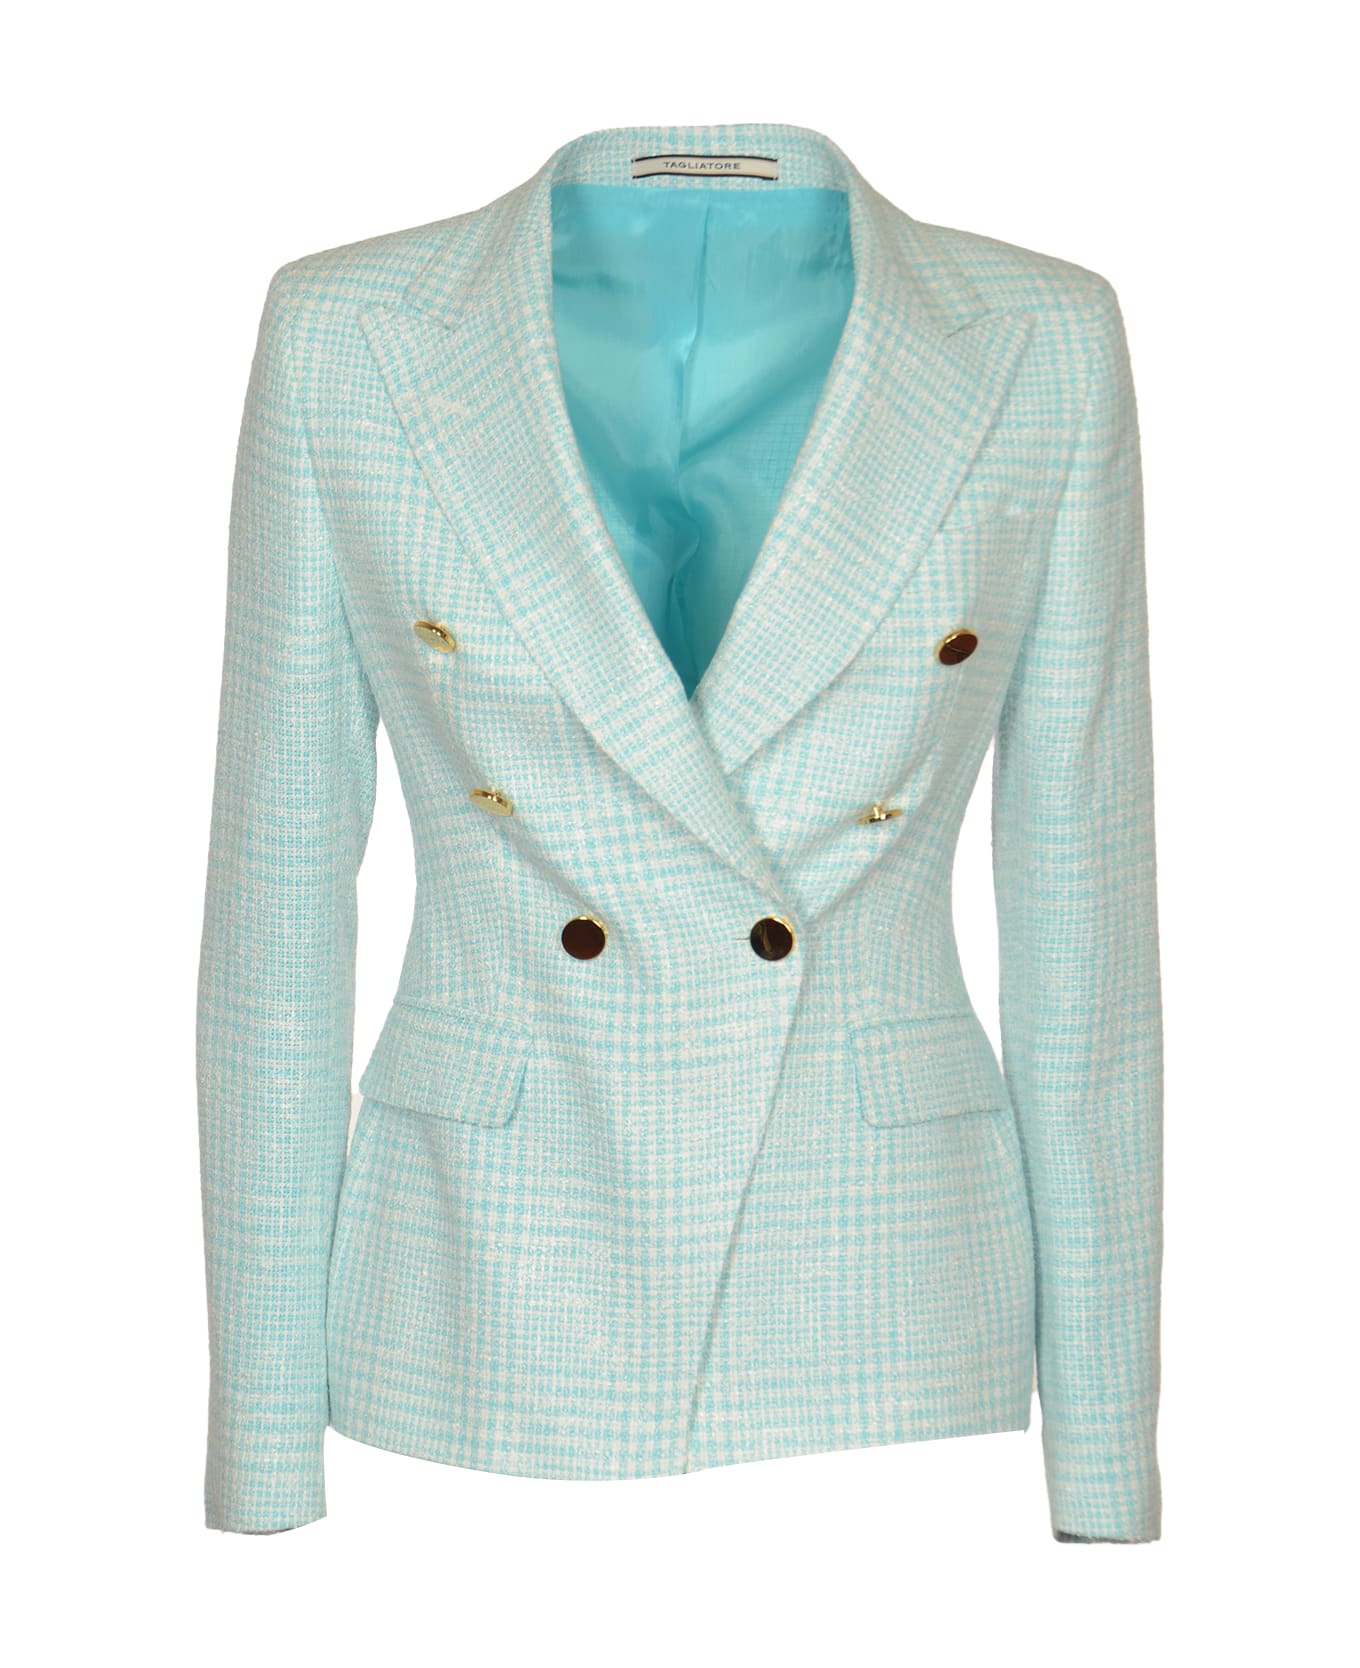 Tagliatore Double-breasted Fitted Blazer - Light Blue ブレザー